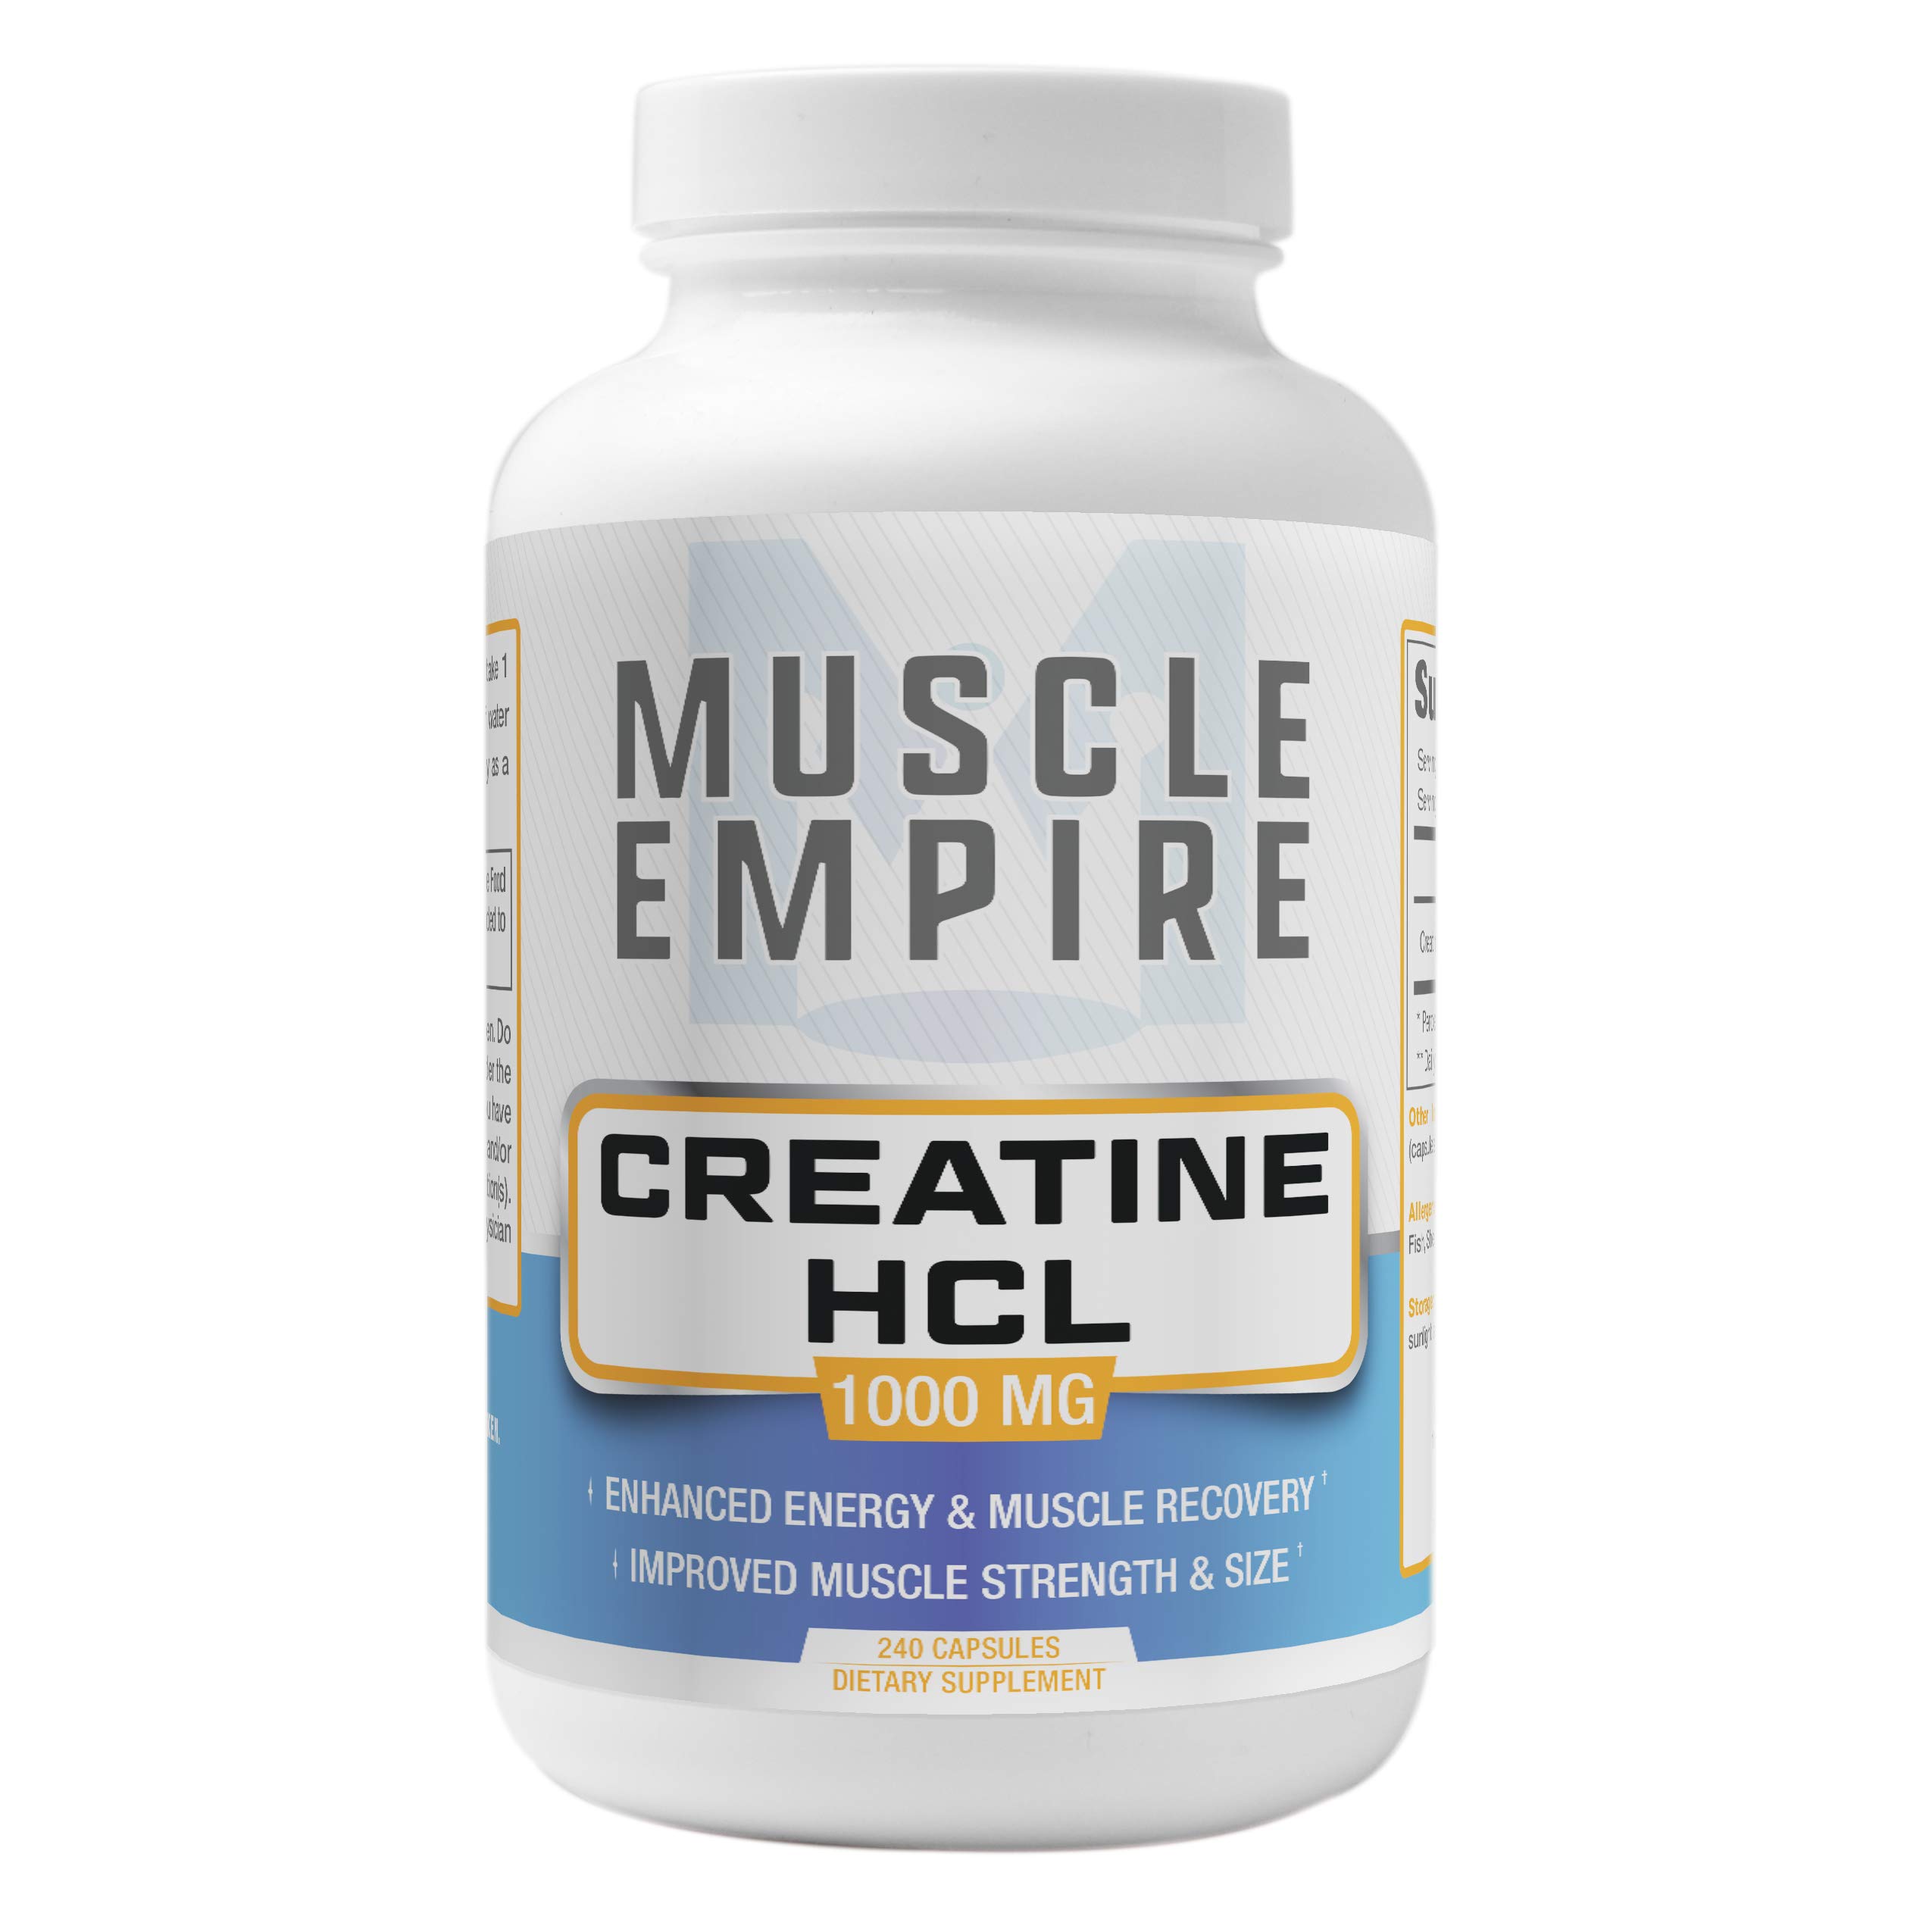 Creatine HCl Capsules – Muscle Building & Recovery Support – 240 Count ...